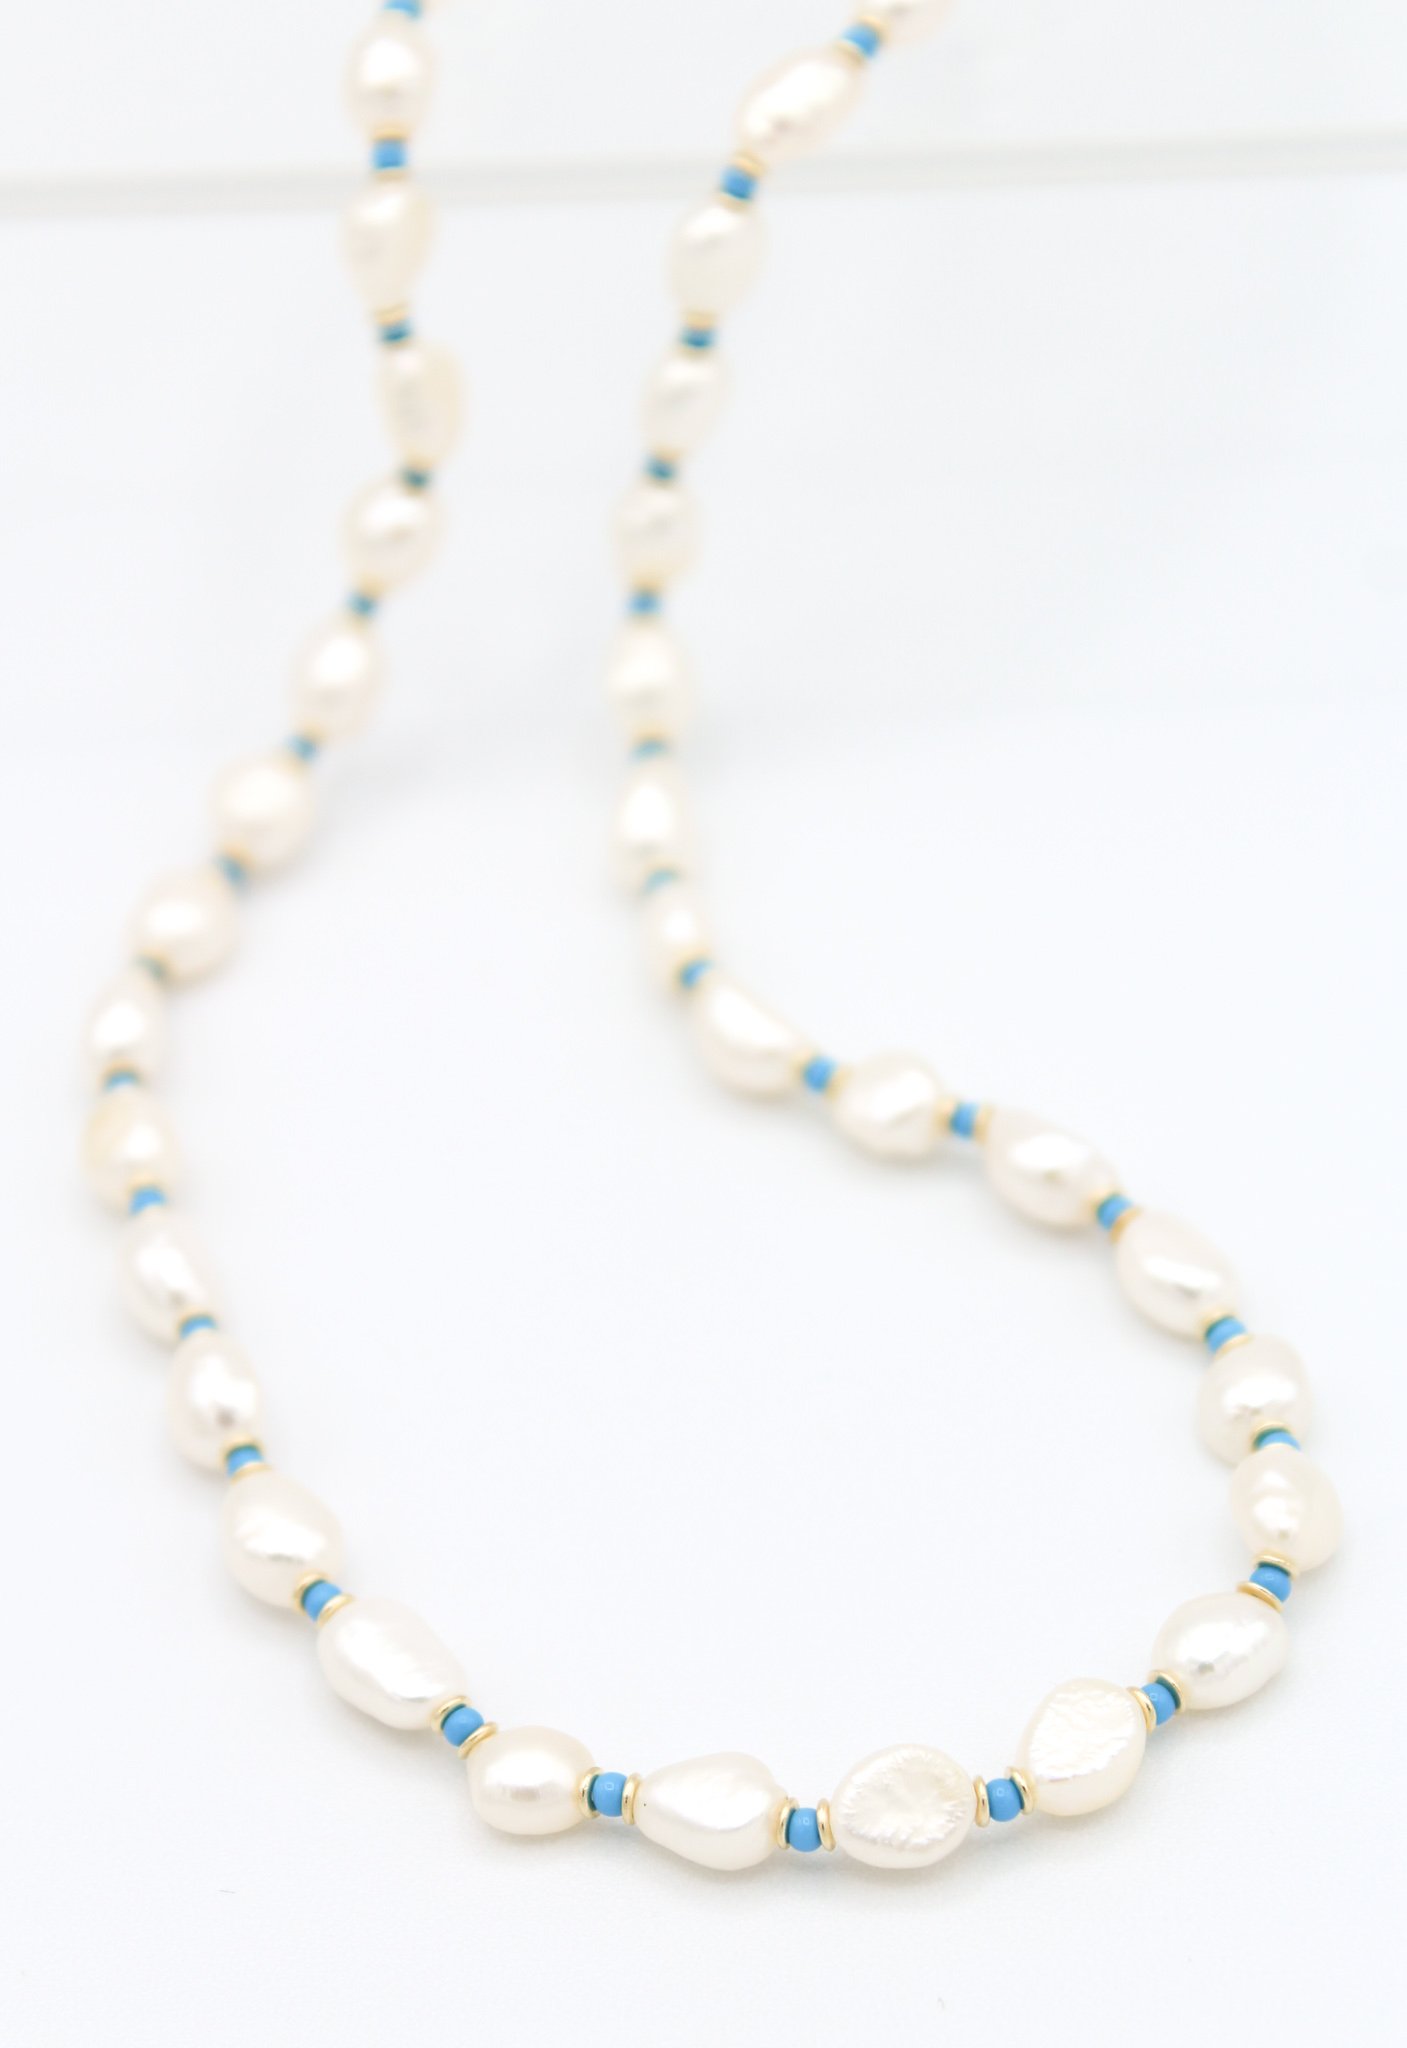 Freshwater Pearl necklace with Fair Trade Beads - Nest Pretty Things